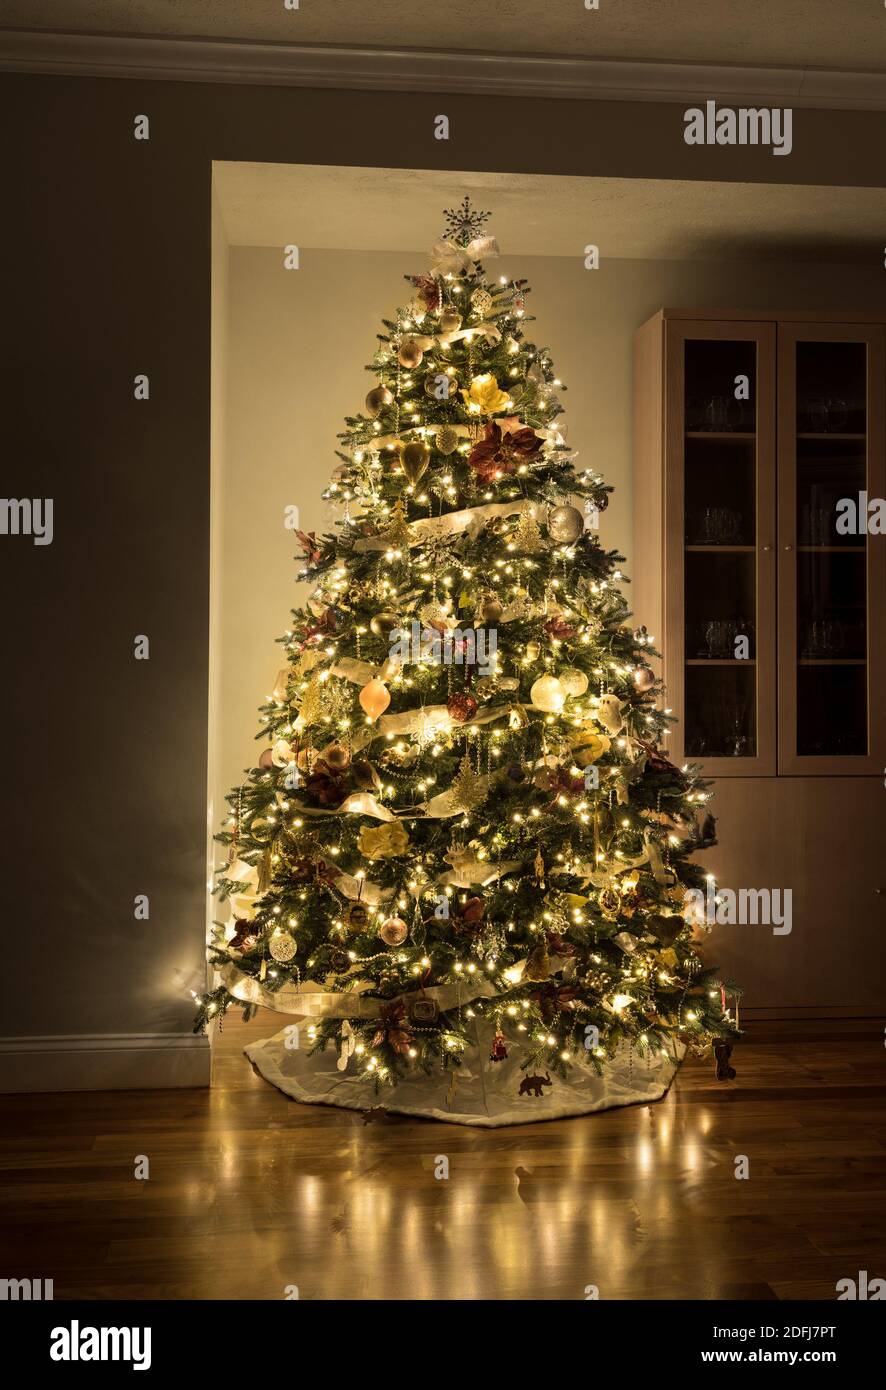 Carefully and beautifully decorated xmas tree in the corner of a modern home with wooden floors Stock Photo